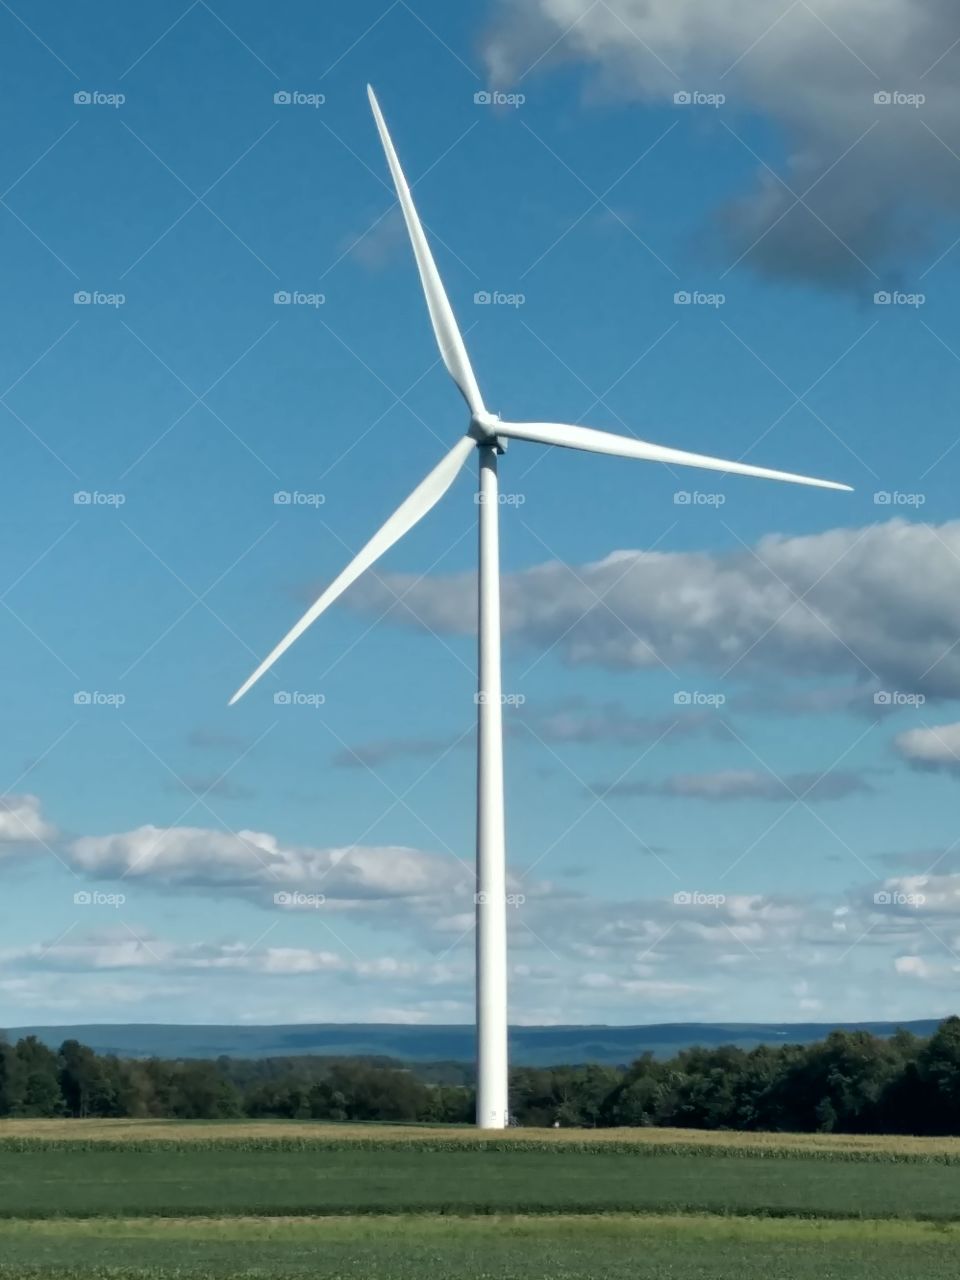 Love these giant turbines!